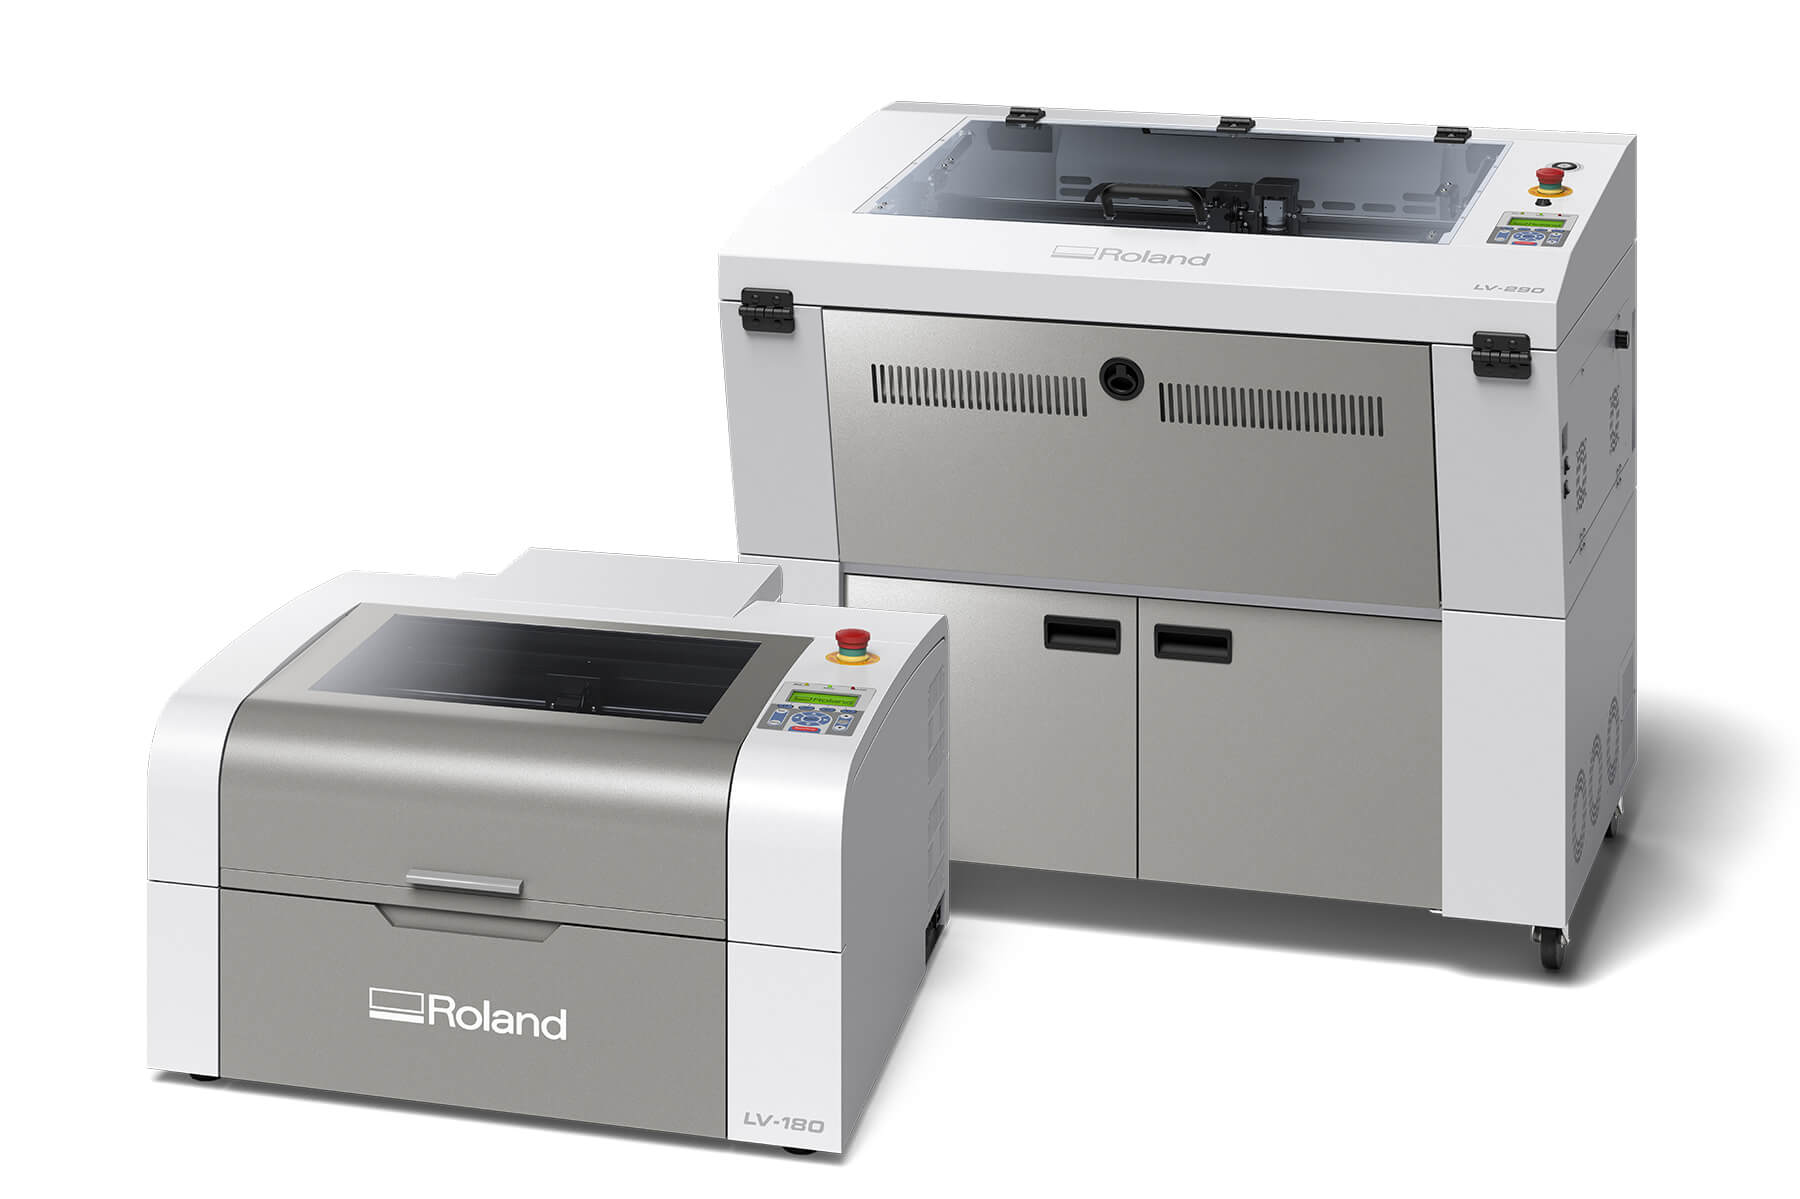 Roland DGA announces the launch of its new LV series laser engraving machines.